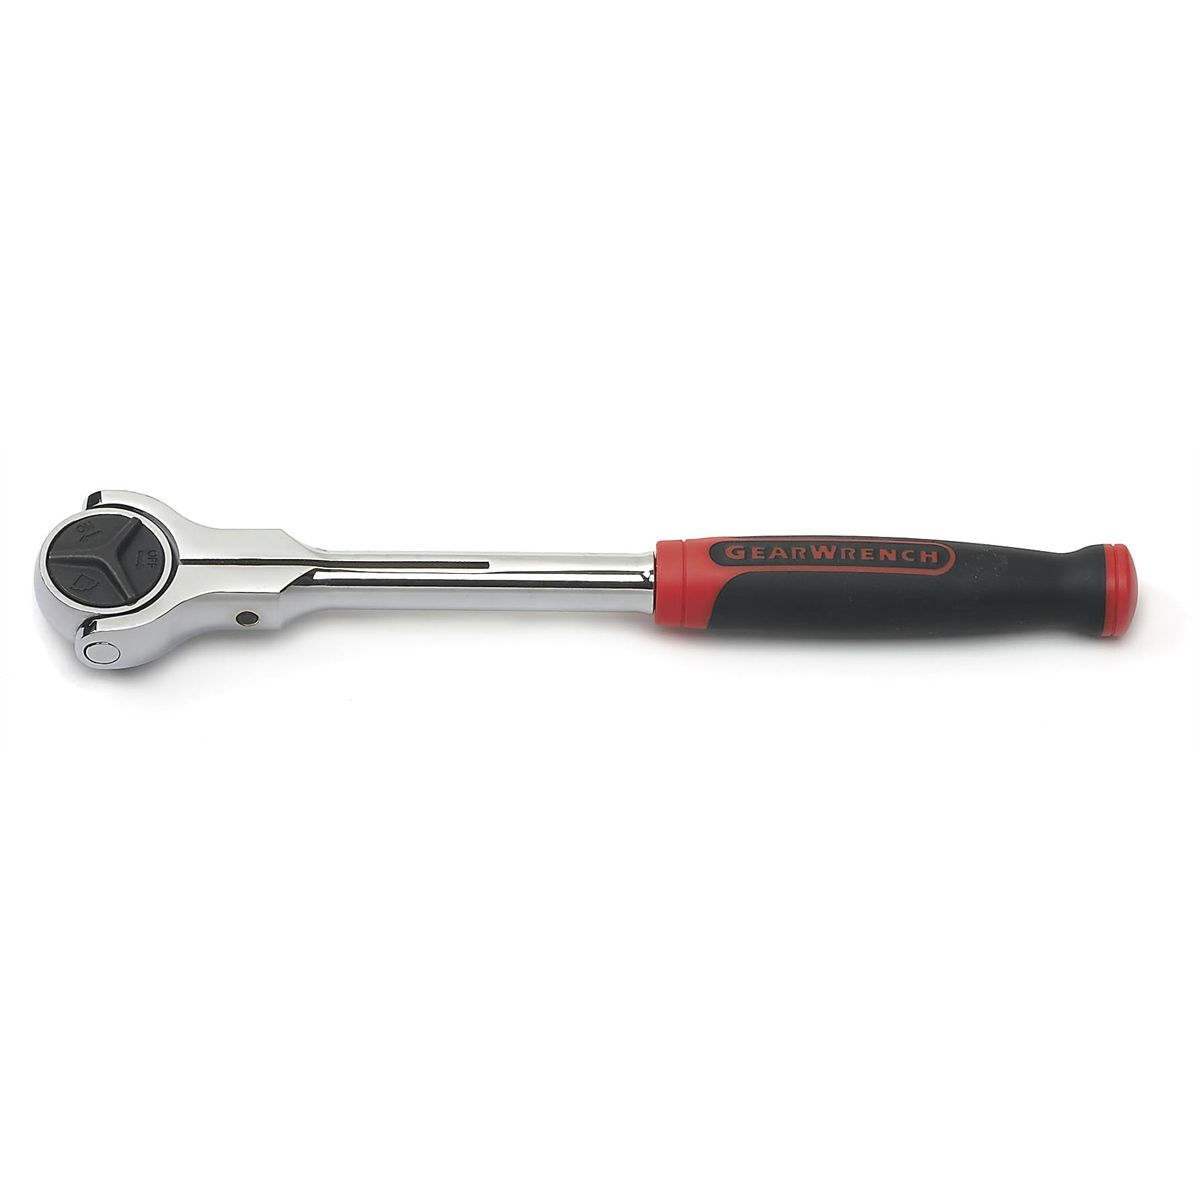 GearWrench 81225 3/8 In Dr Roto Ratchet